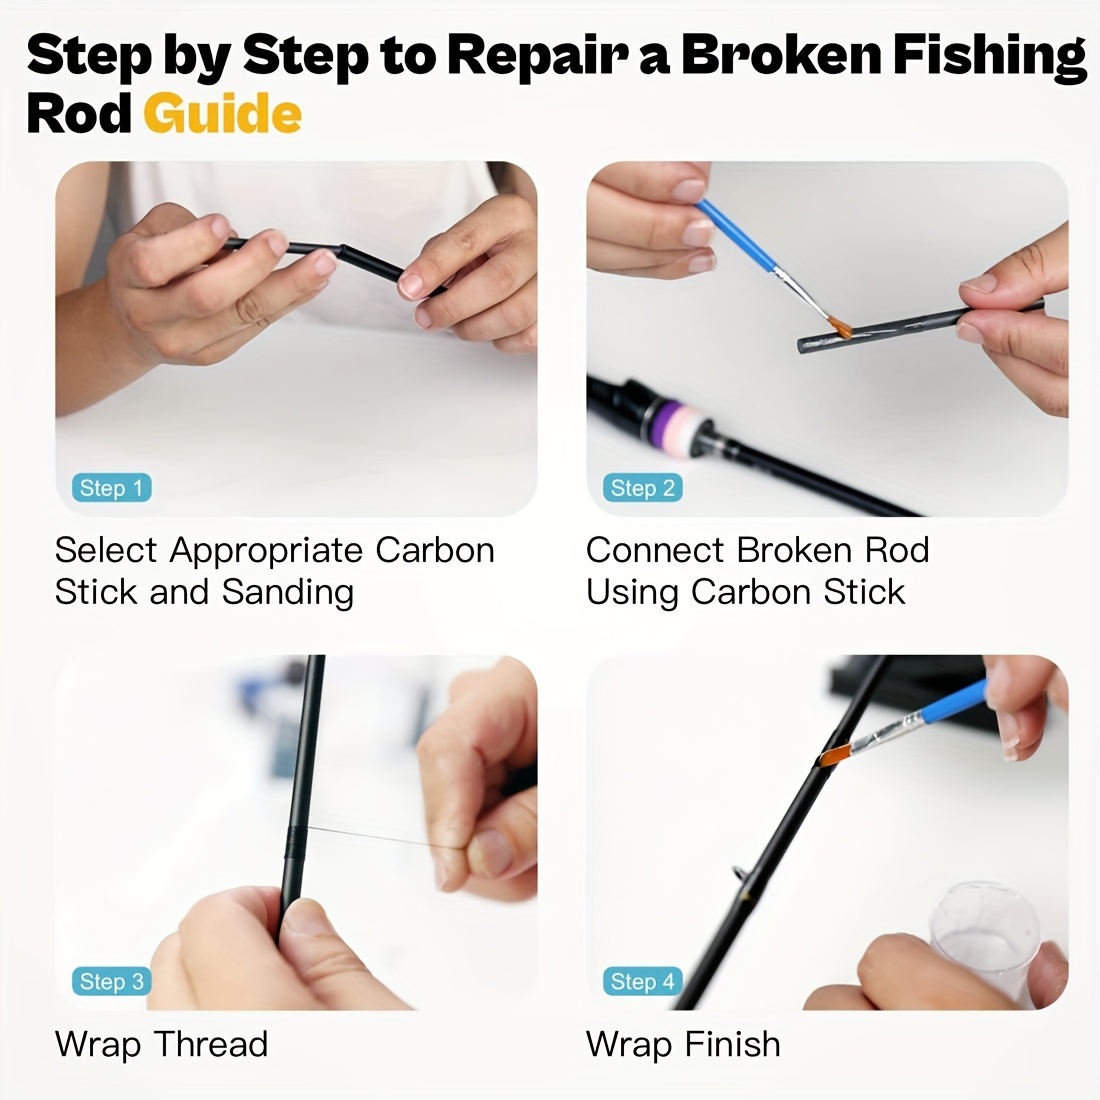 REPLACE FOR BROKEN Parts with Carbon Fiber Fishing Rod Repair Kit